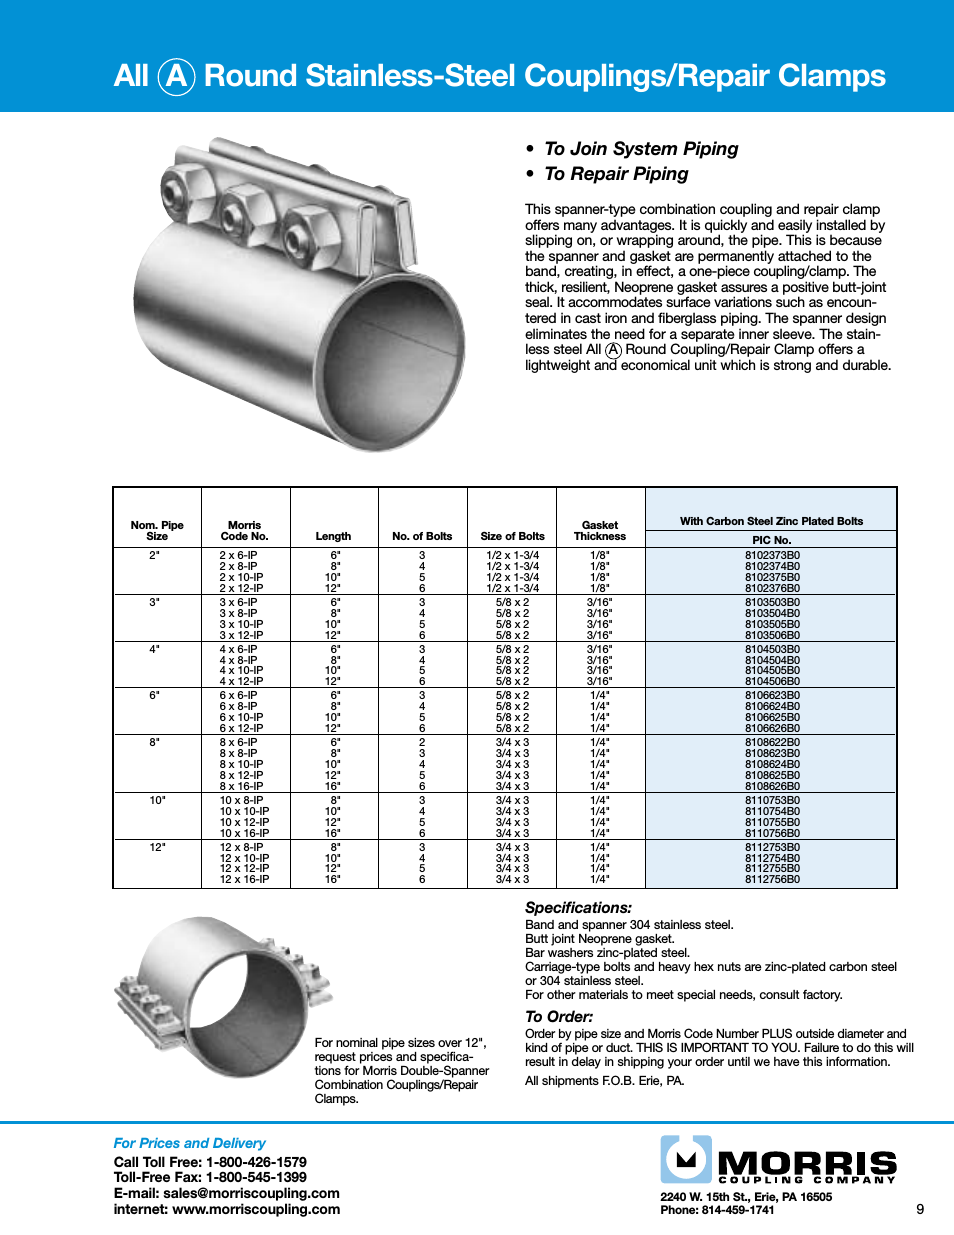 Round Stainless-Steel Couplings_Repair Clamps